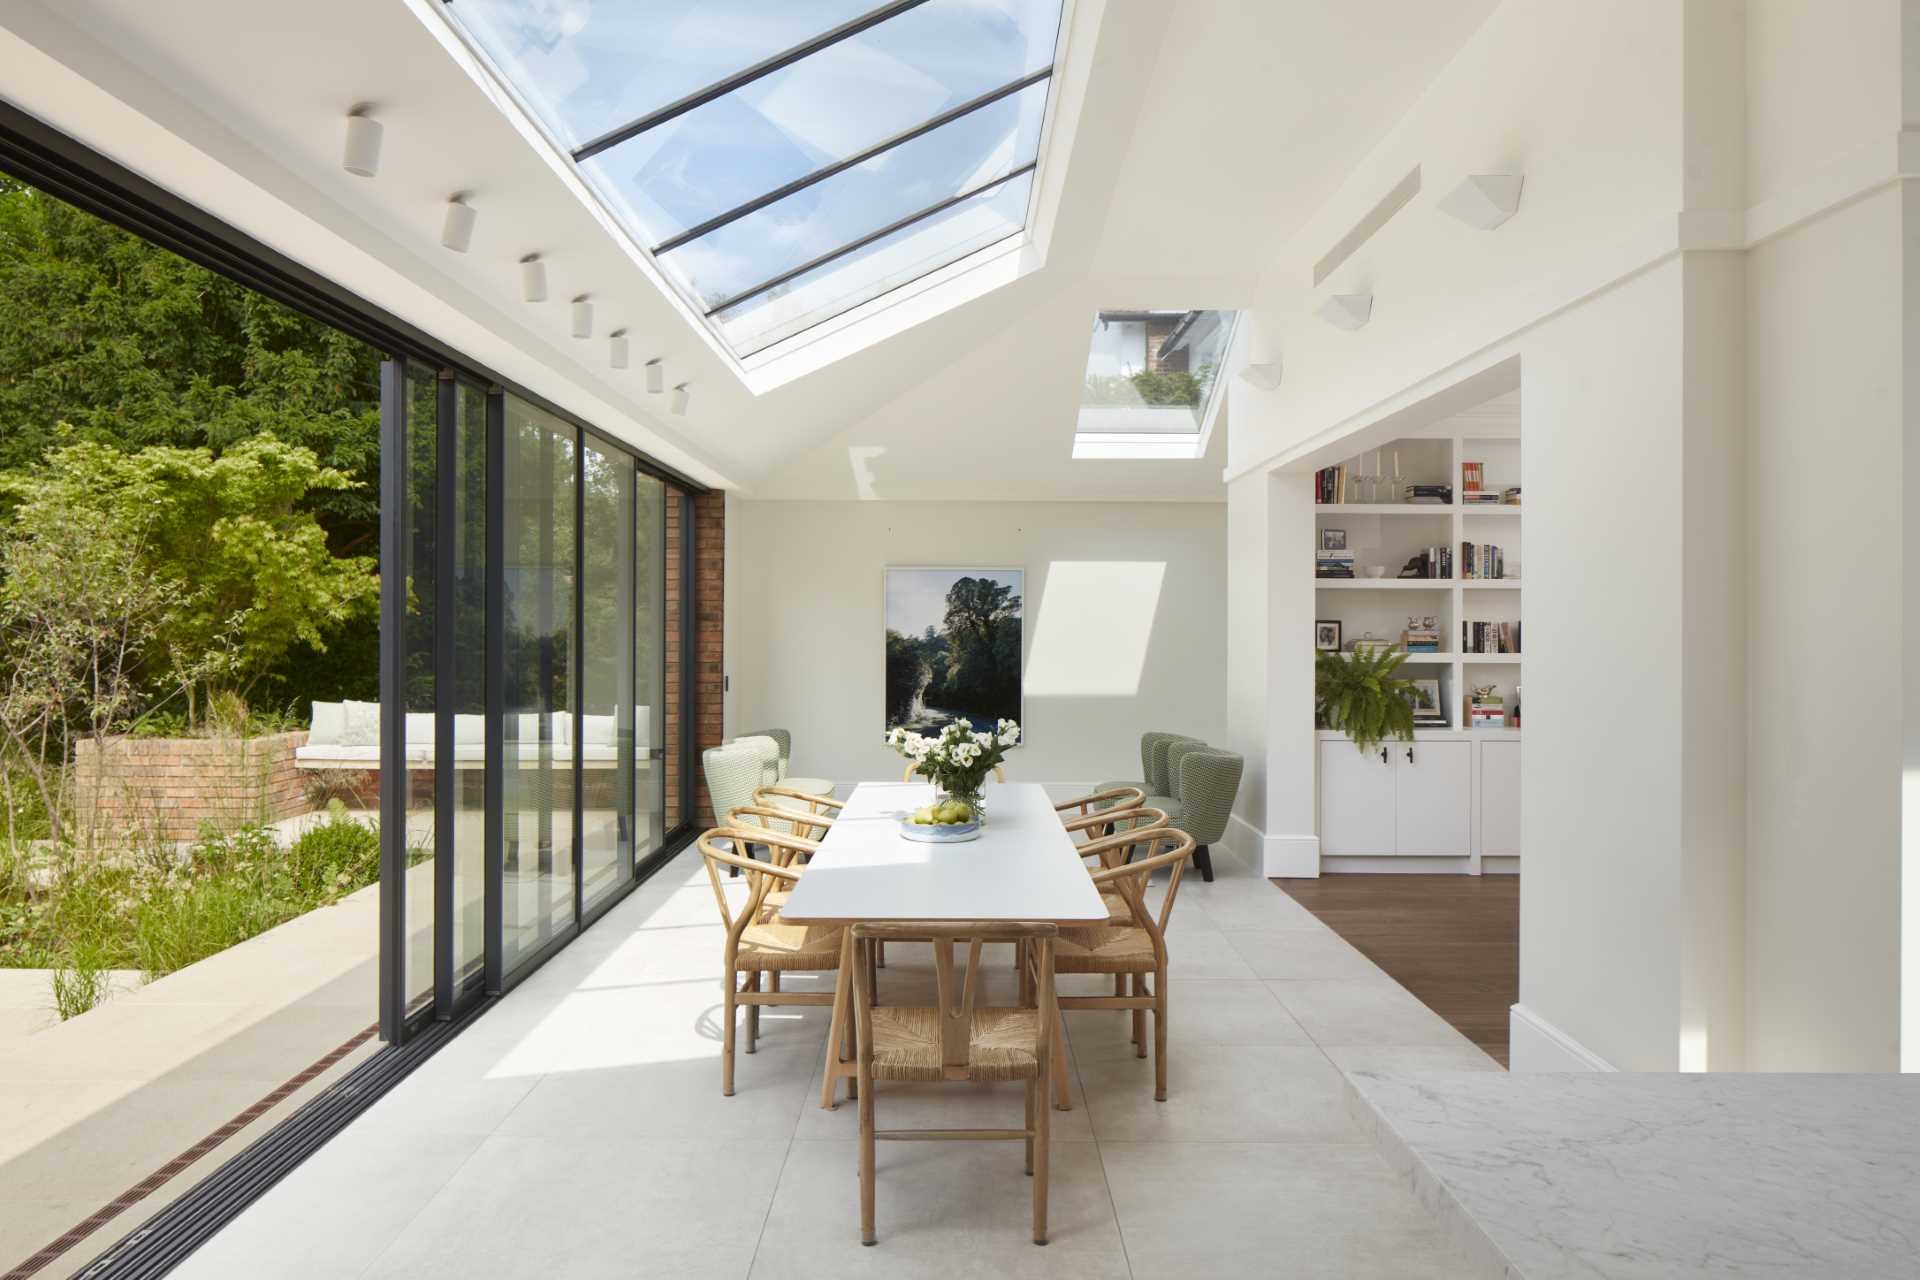 An updated brick extension for an Edwardian home includes a sitting area, dining area, and kitchen.